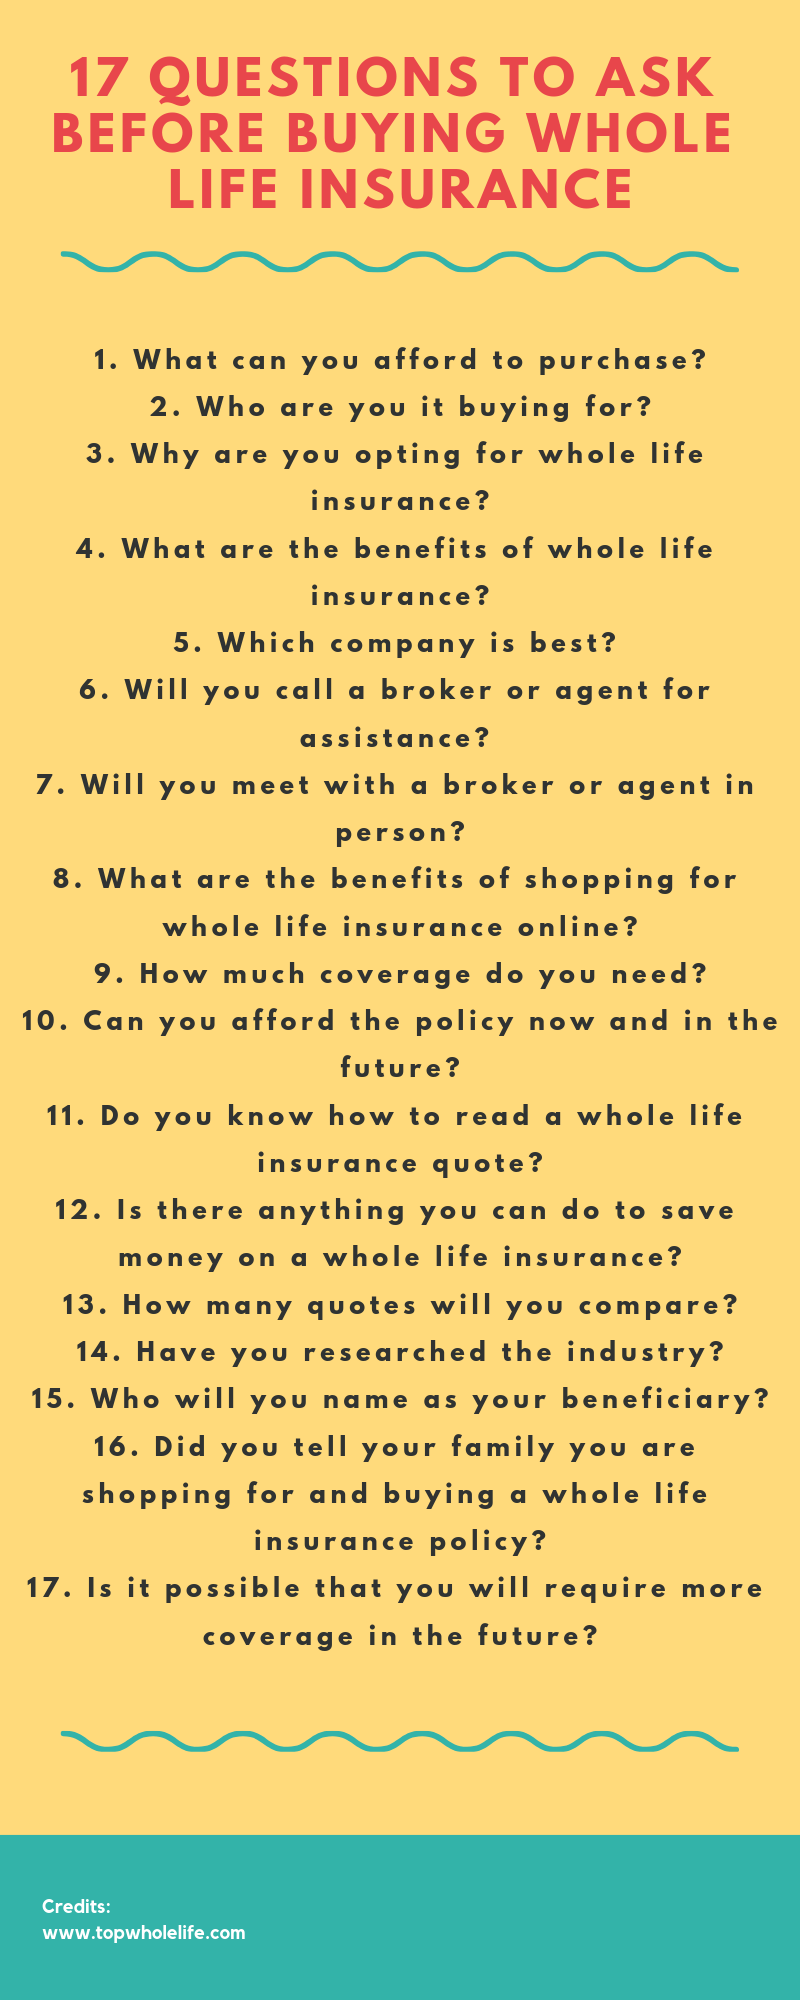 17 Questions to Ask Before Buying Whole Life Insurance ...